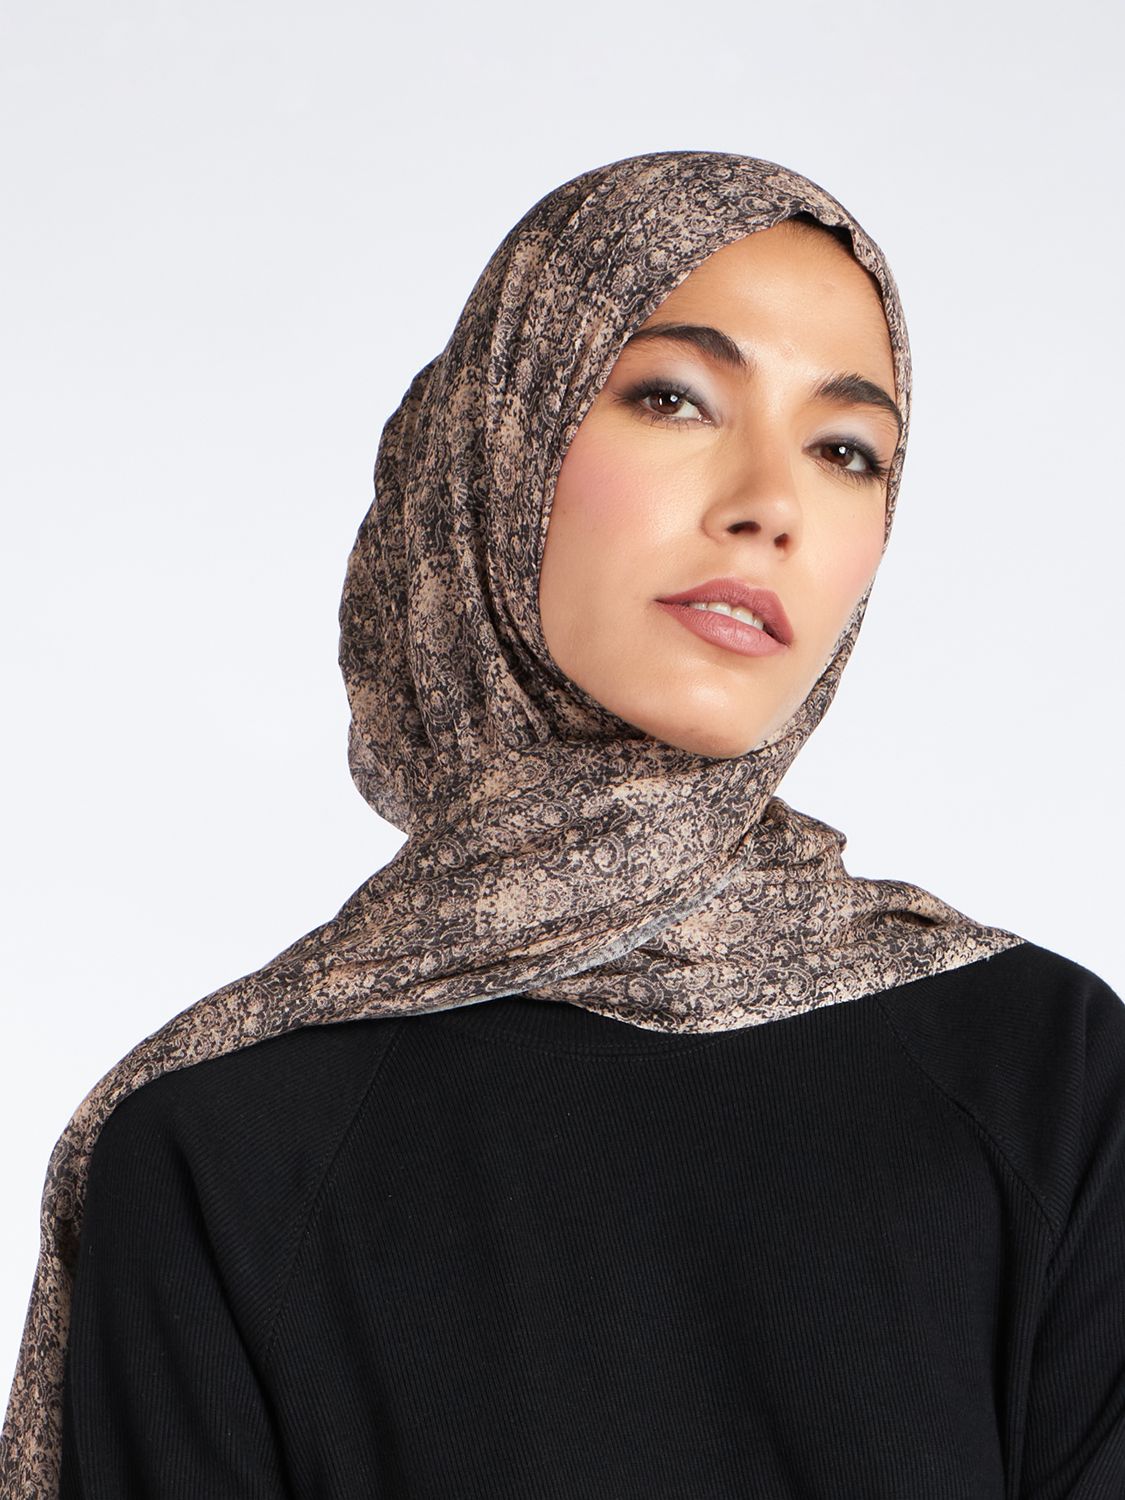 Aab Lace Print Hijab, Natural, One Size